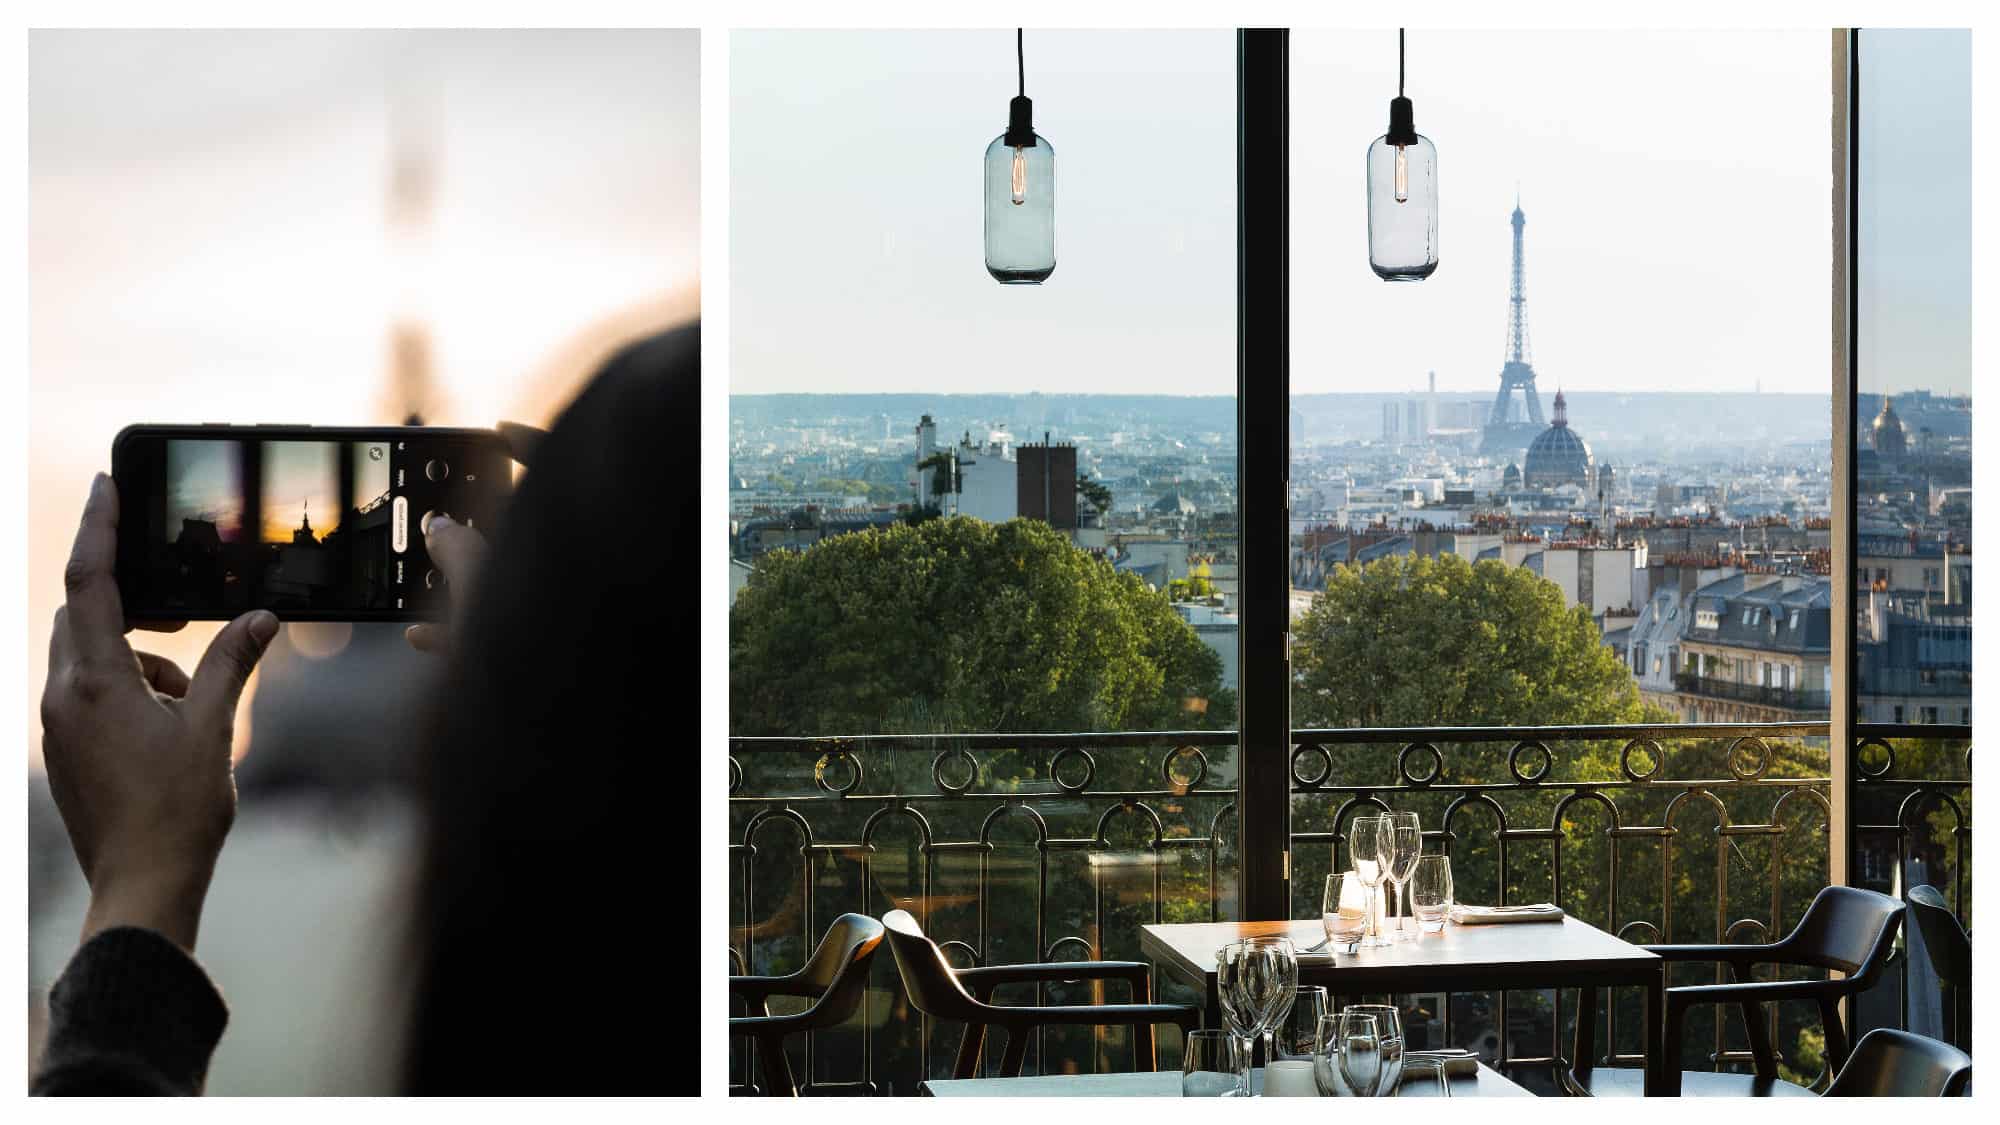 A woman taking a picture of a Paris view (left). The view of the Eiffel tower and the trees nearby from a table at the Terrass Hotel rooftop bar in Montmartre (right).